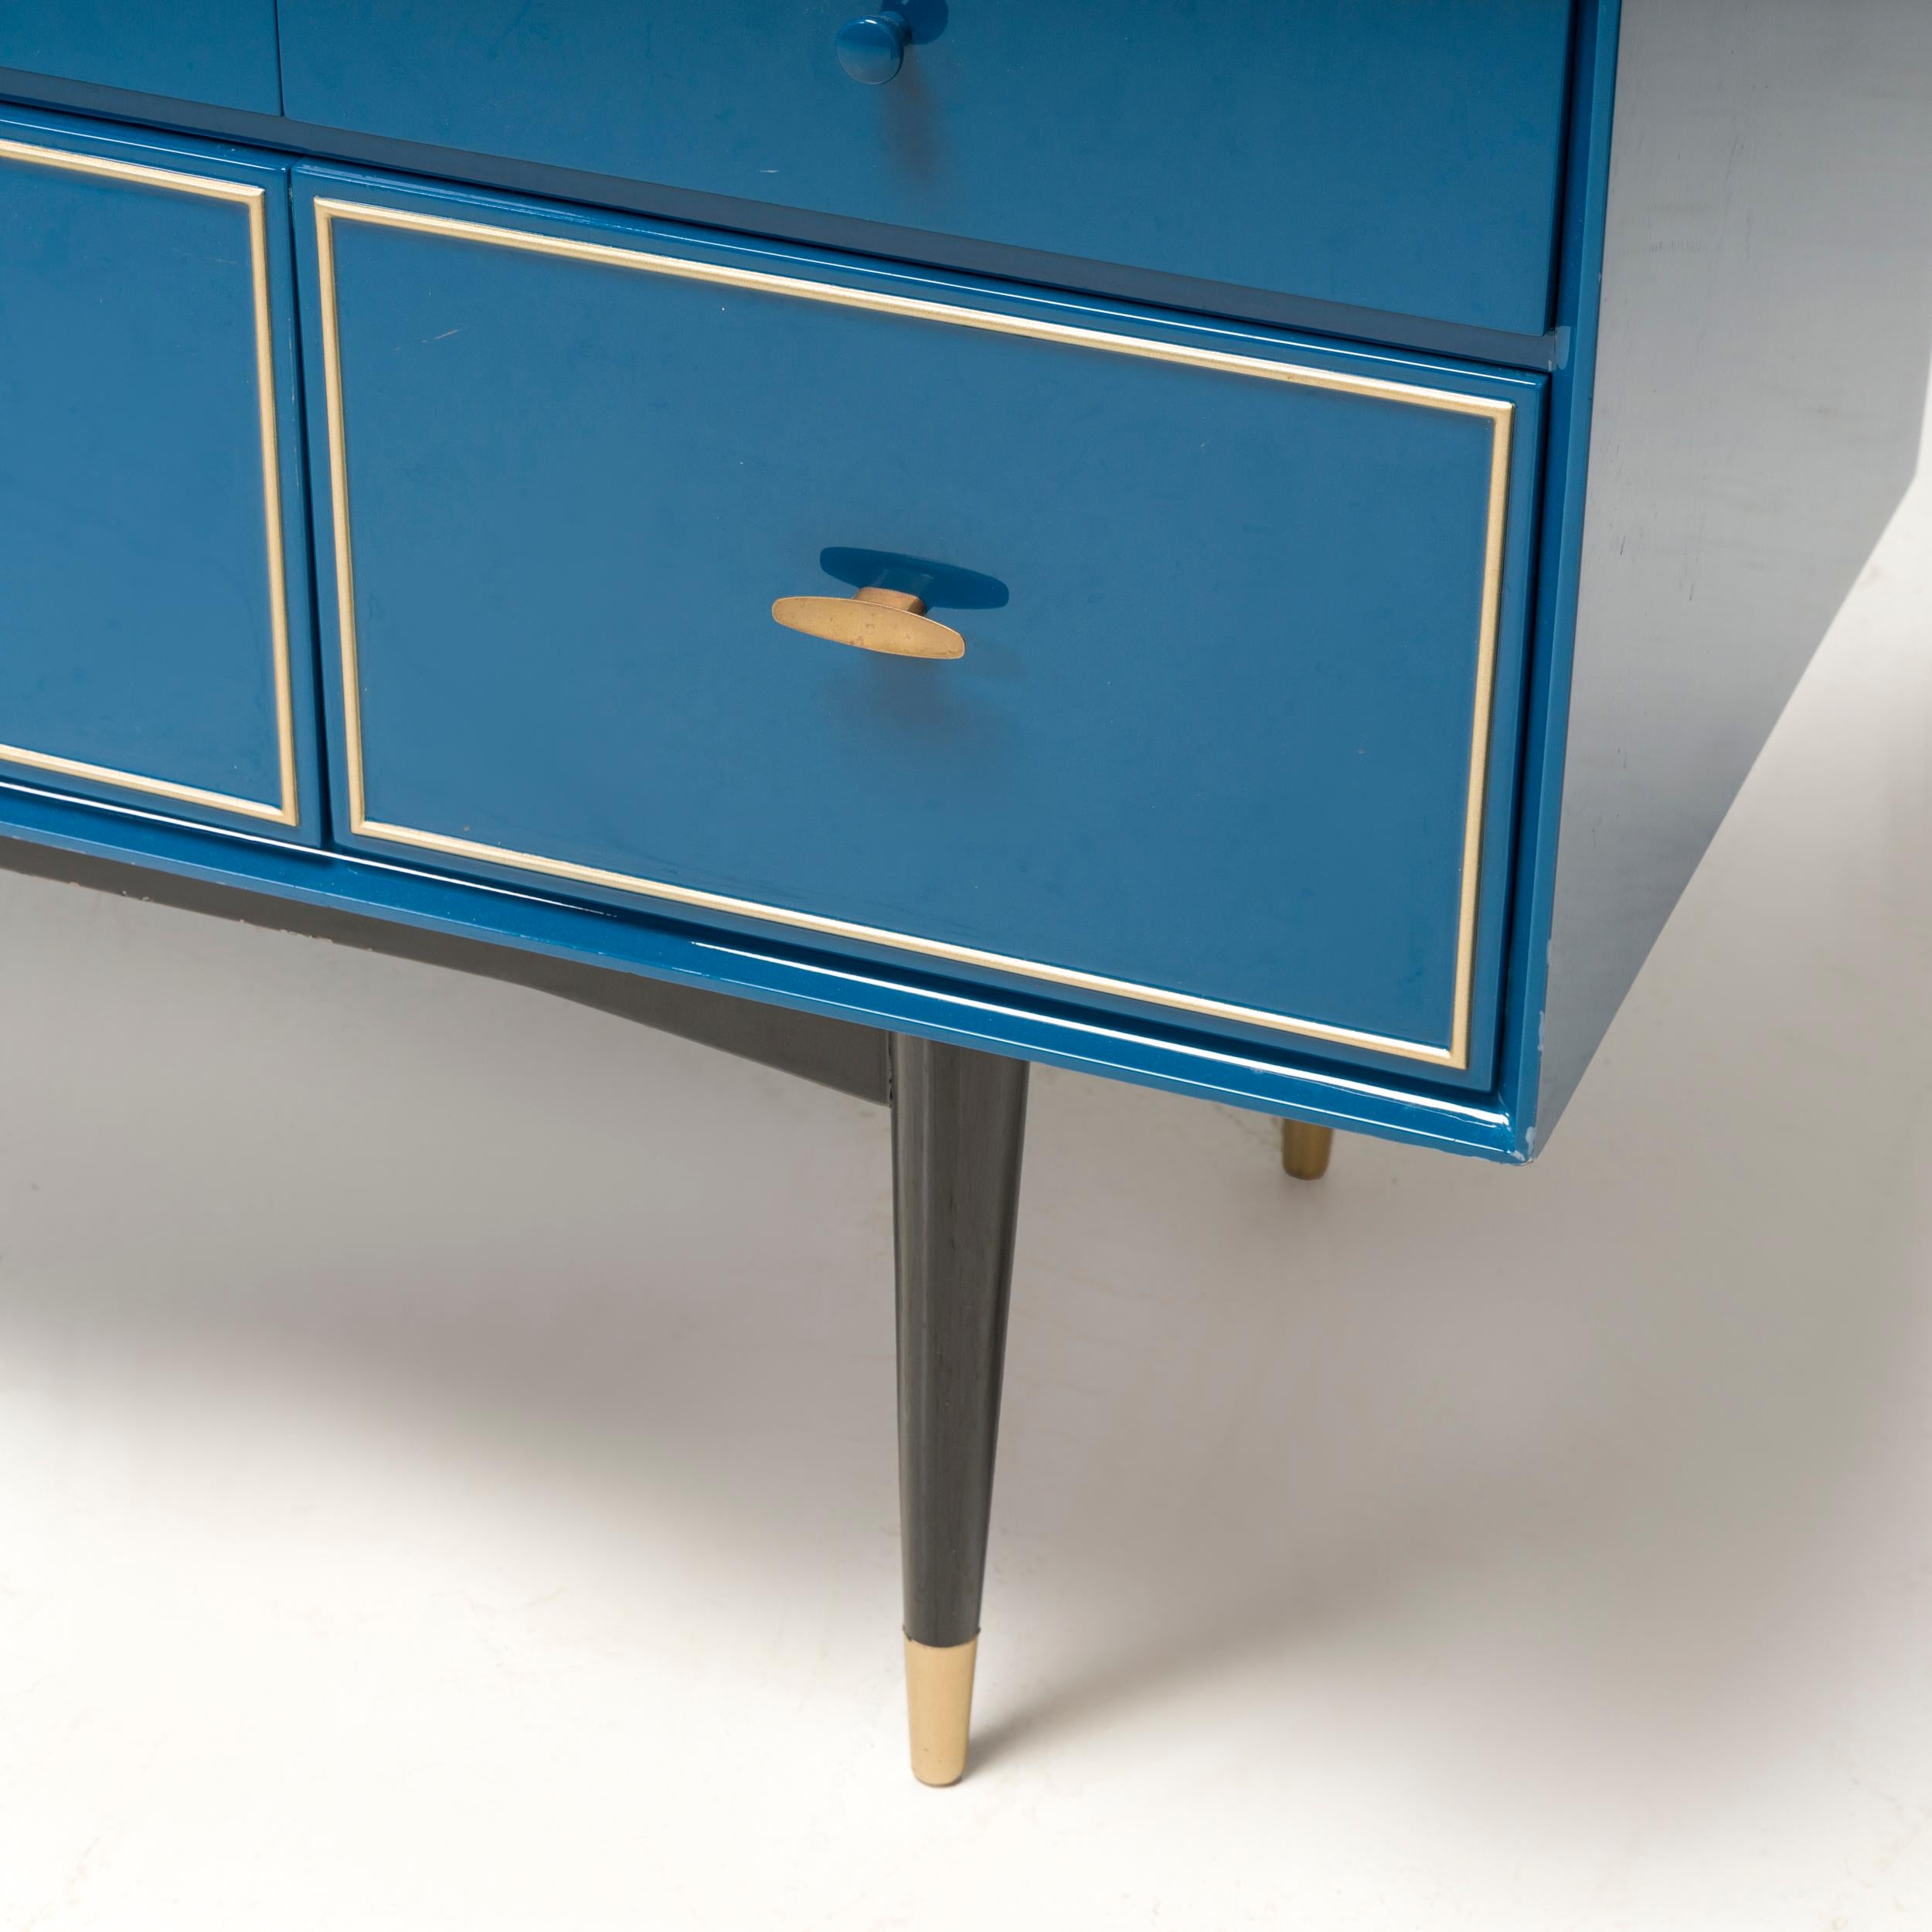  1960s Mid Century Modern Chest of drawers Blue Gloss With Brass Trim  5